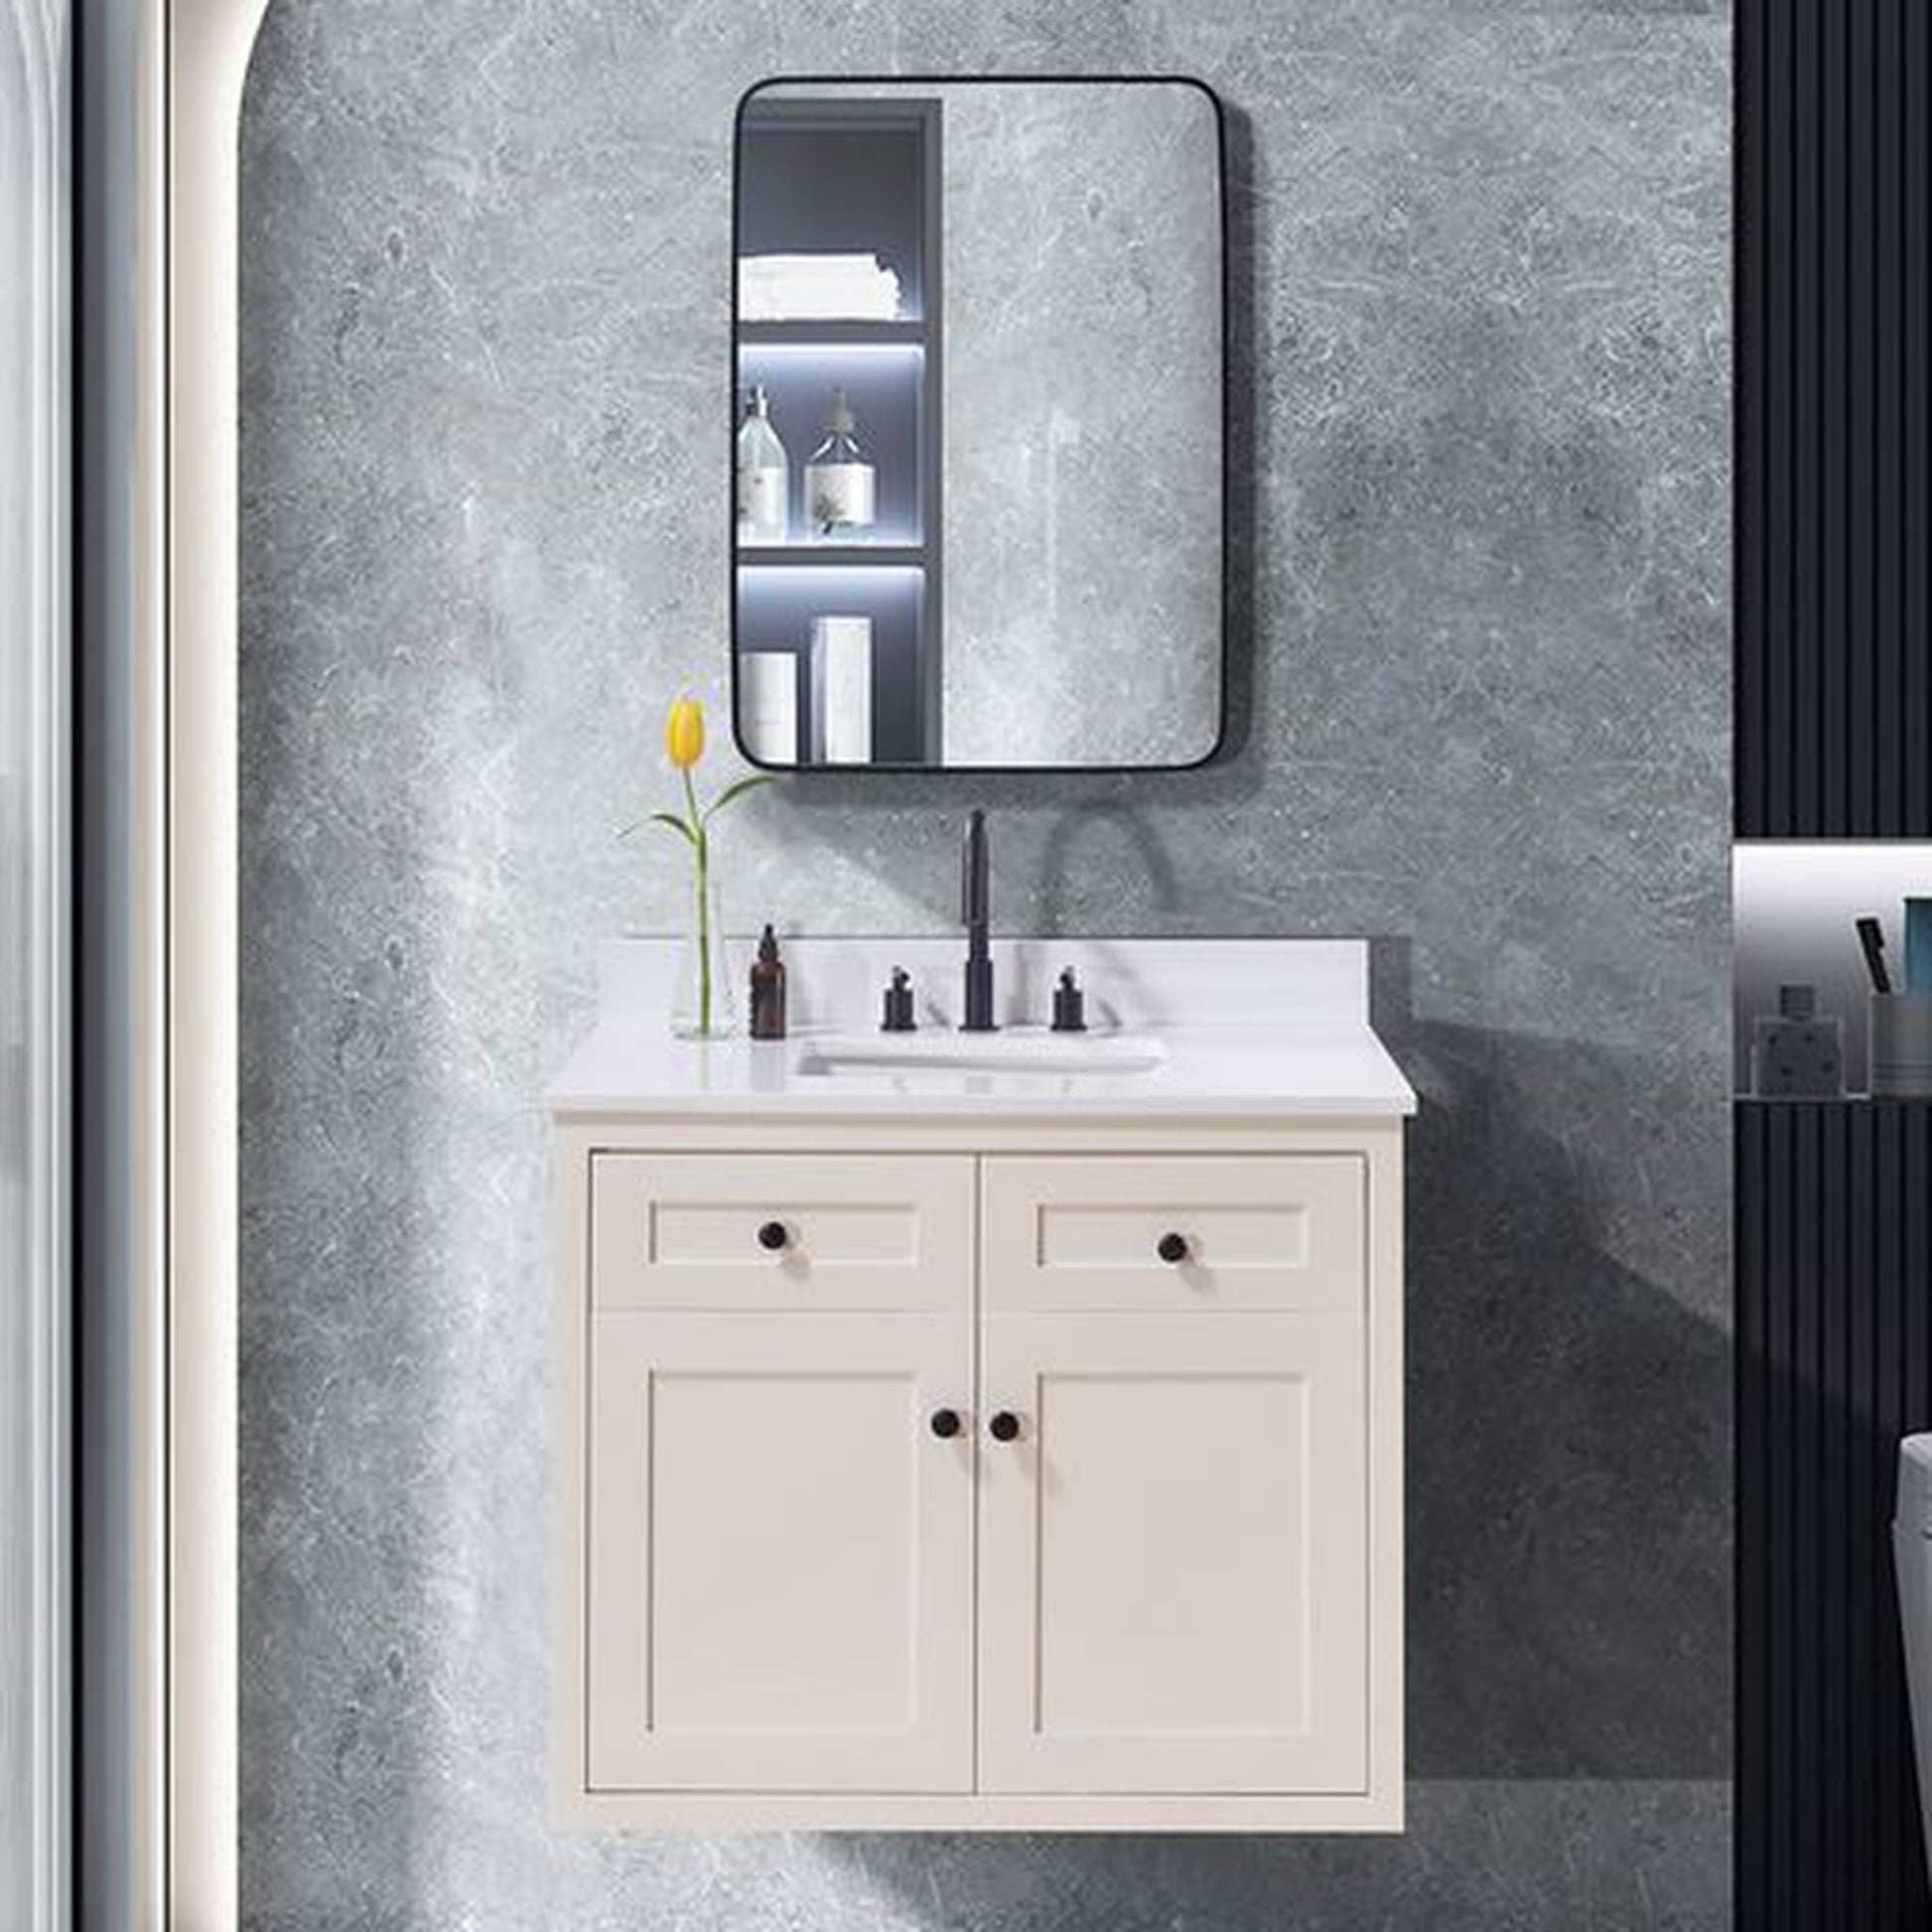 Altair Andalo 37" x 22" Snow White Composite Stone Bathroom Vanity Top With White SInk